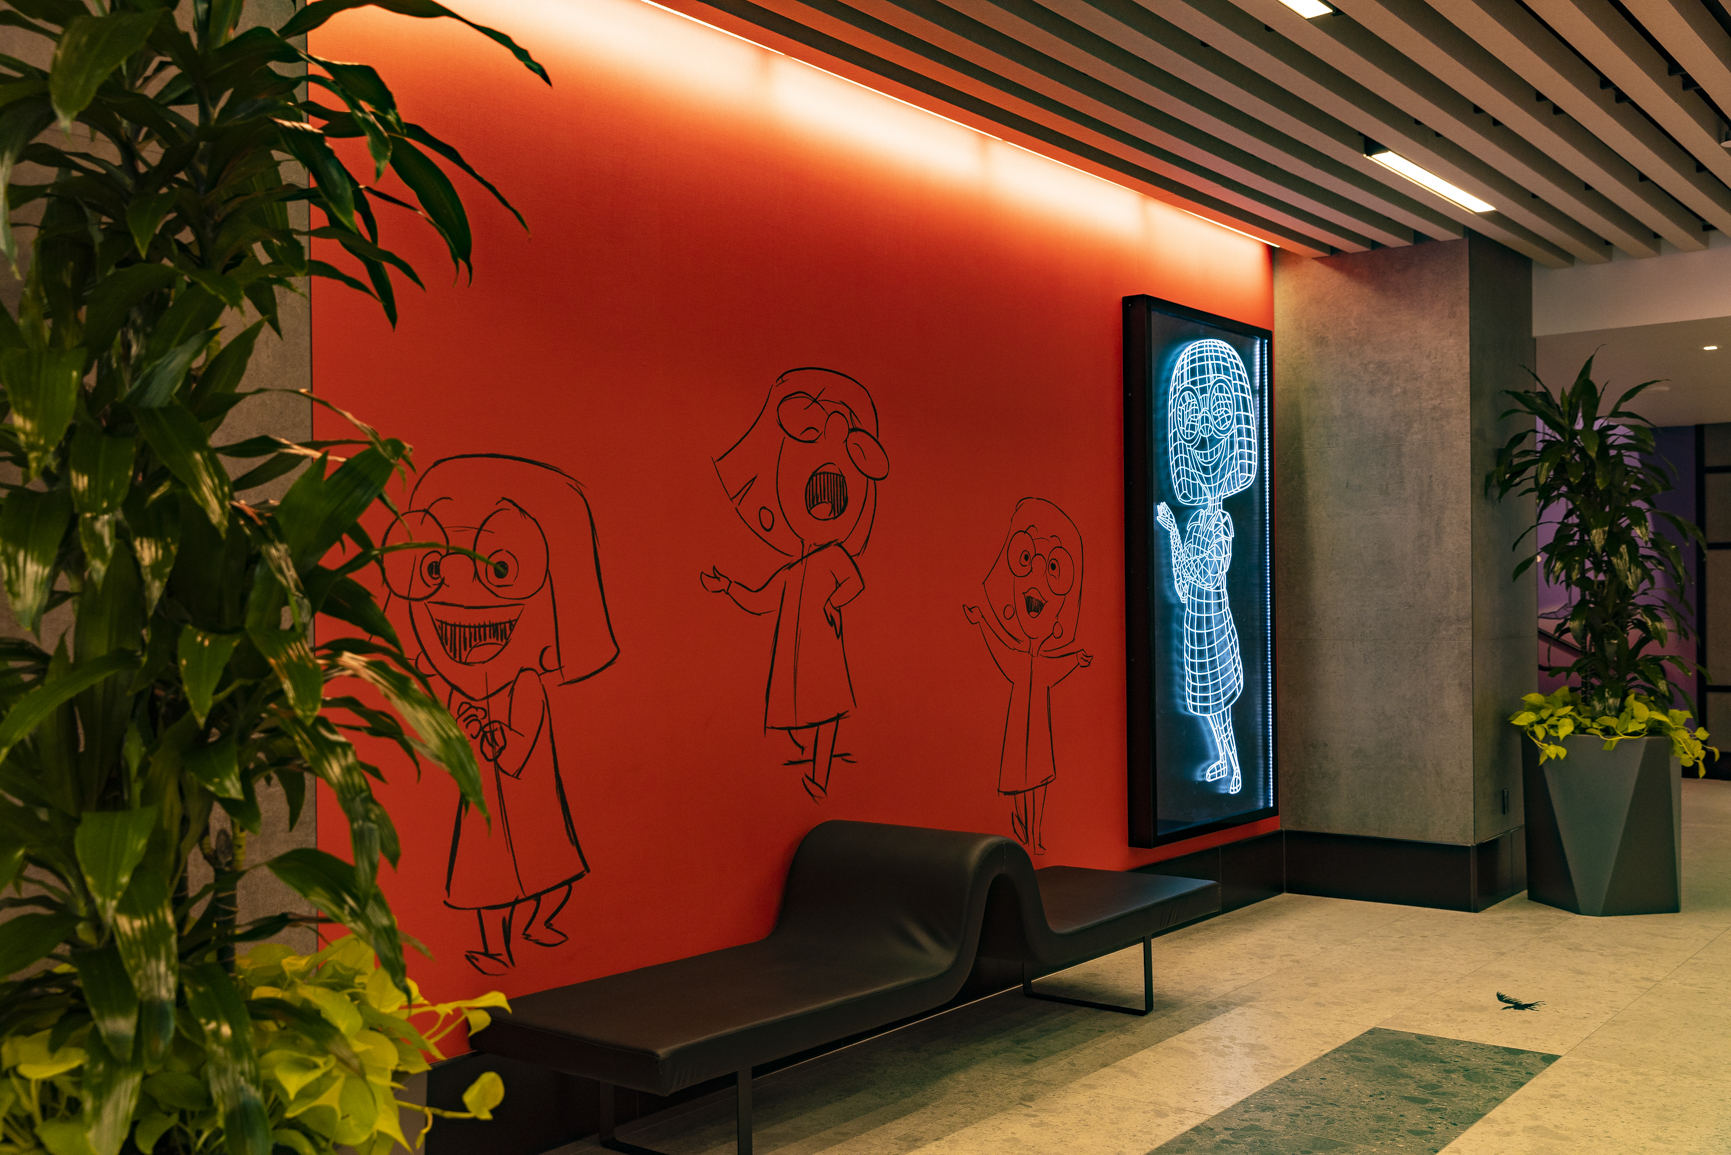 The rear entrance of Pixar Place Hotel at Disneyland Resort in Anaheim, Calif., welcomes guests with décor inspired by the stages of character design development as ideas go from pencil and paper illustrations to something built in the computer. (Christian Thompson/Disneyland Resort)